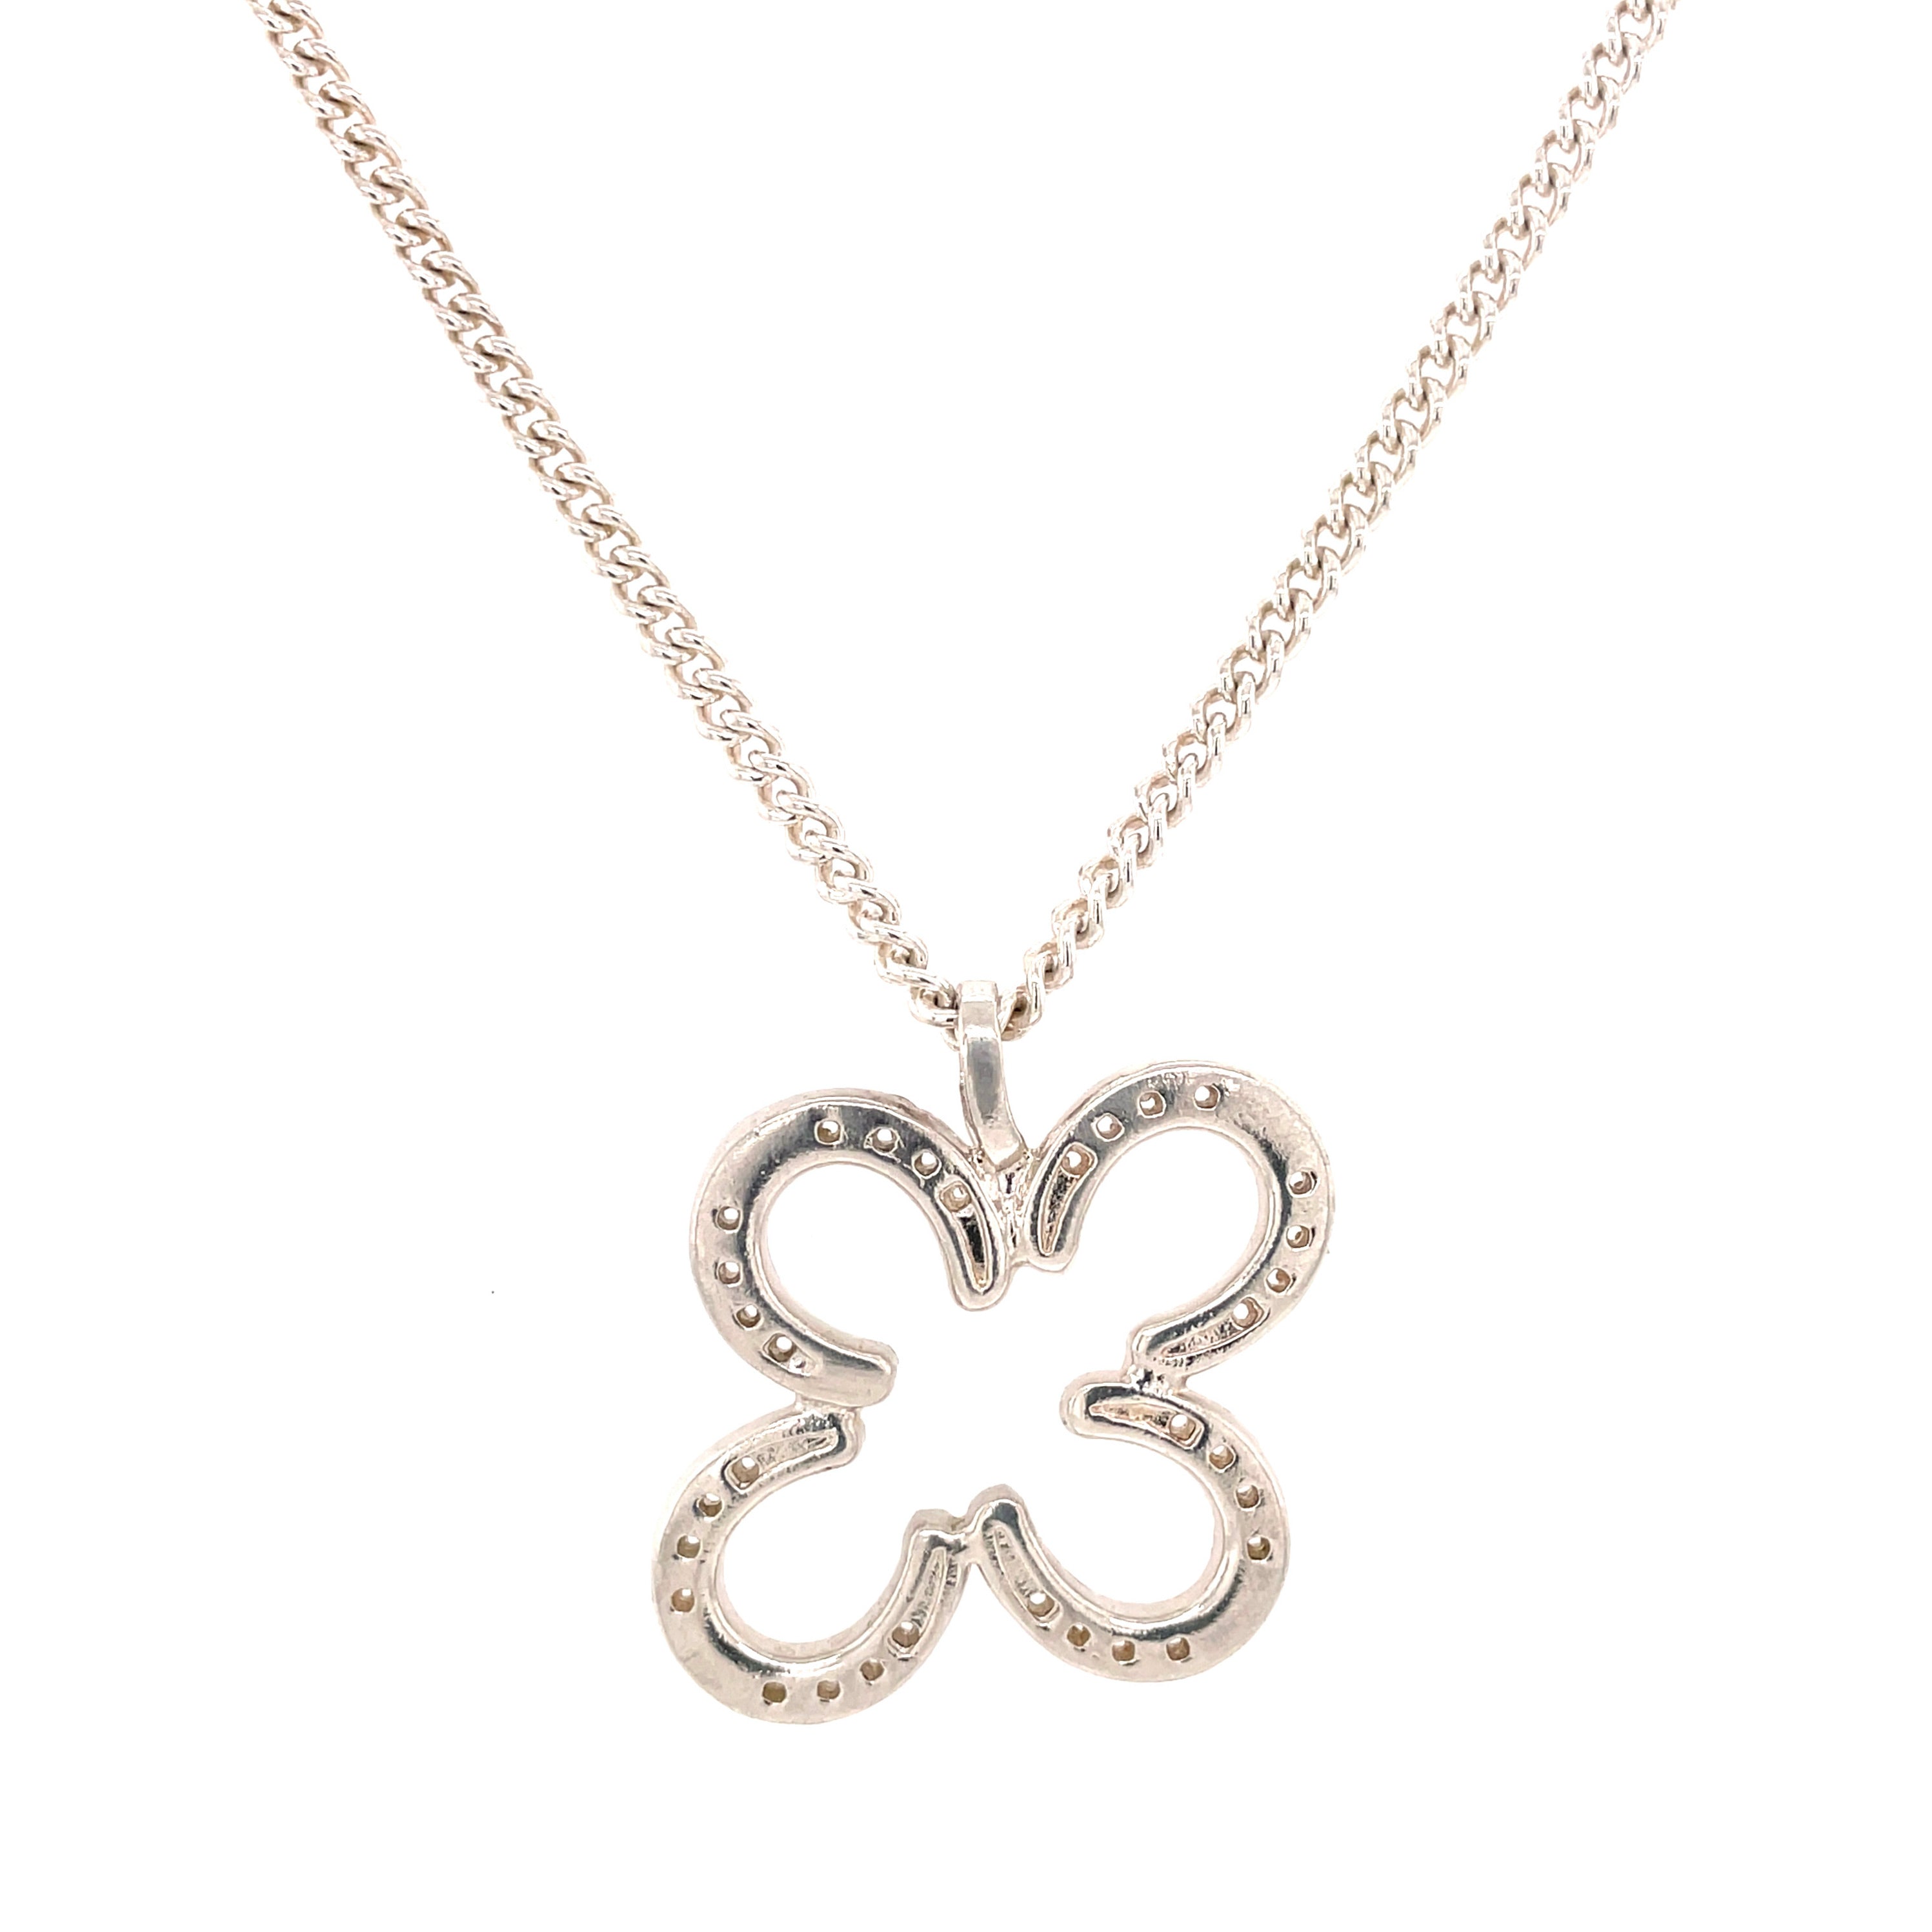 Lucky clover and horseshoe necklace